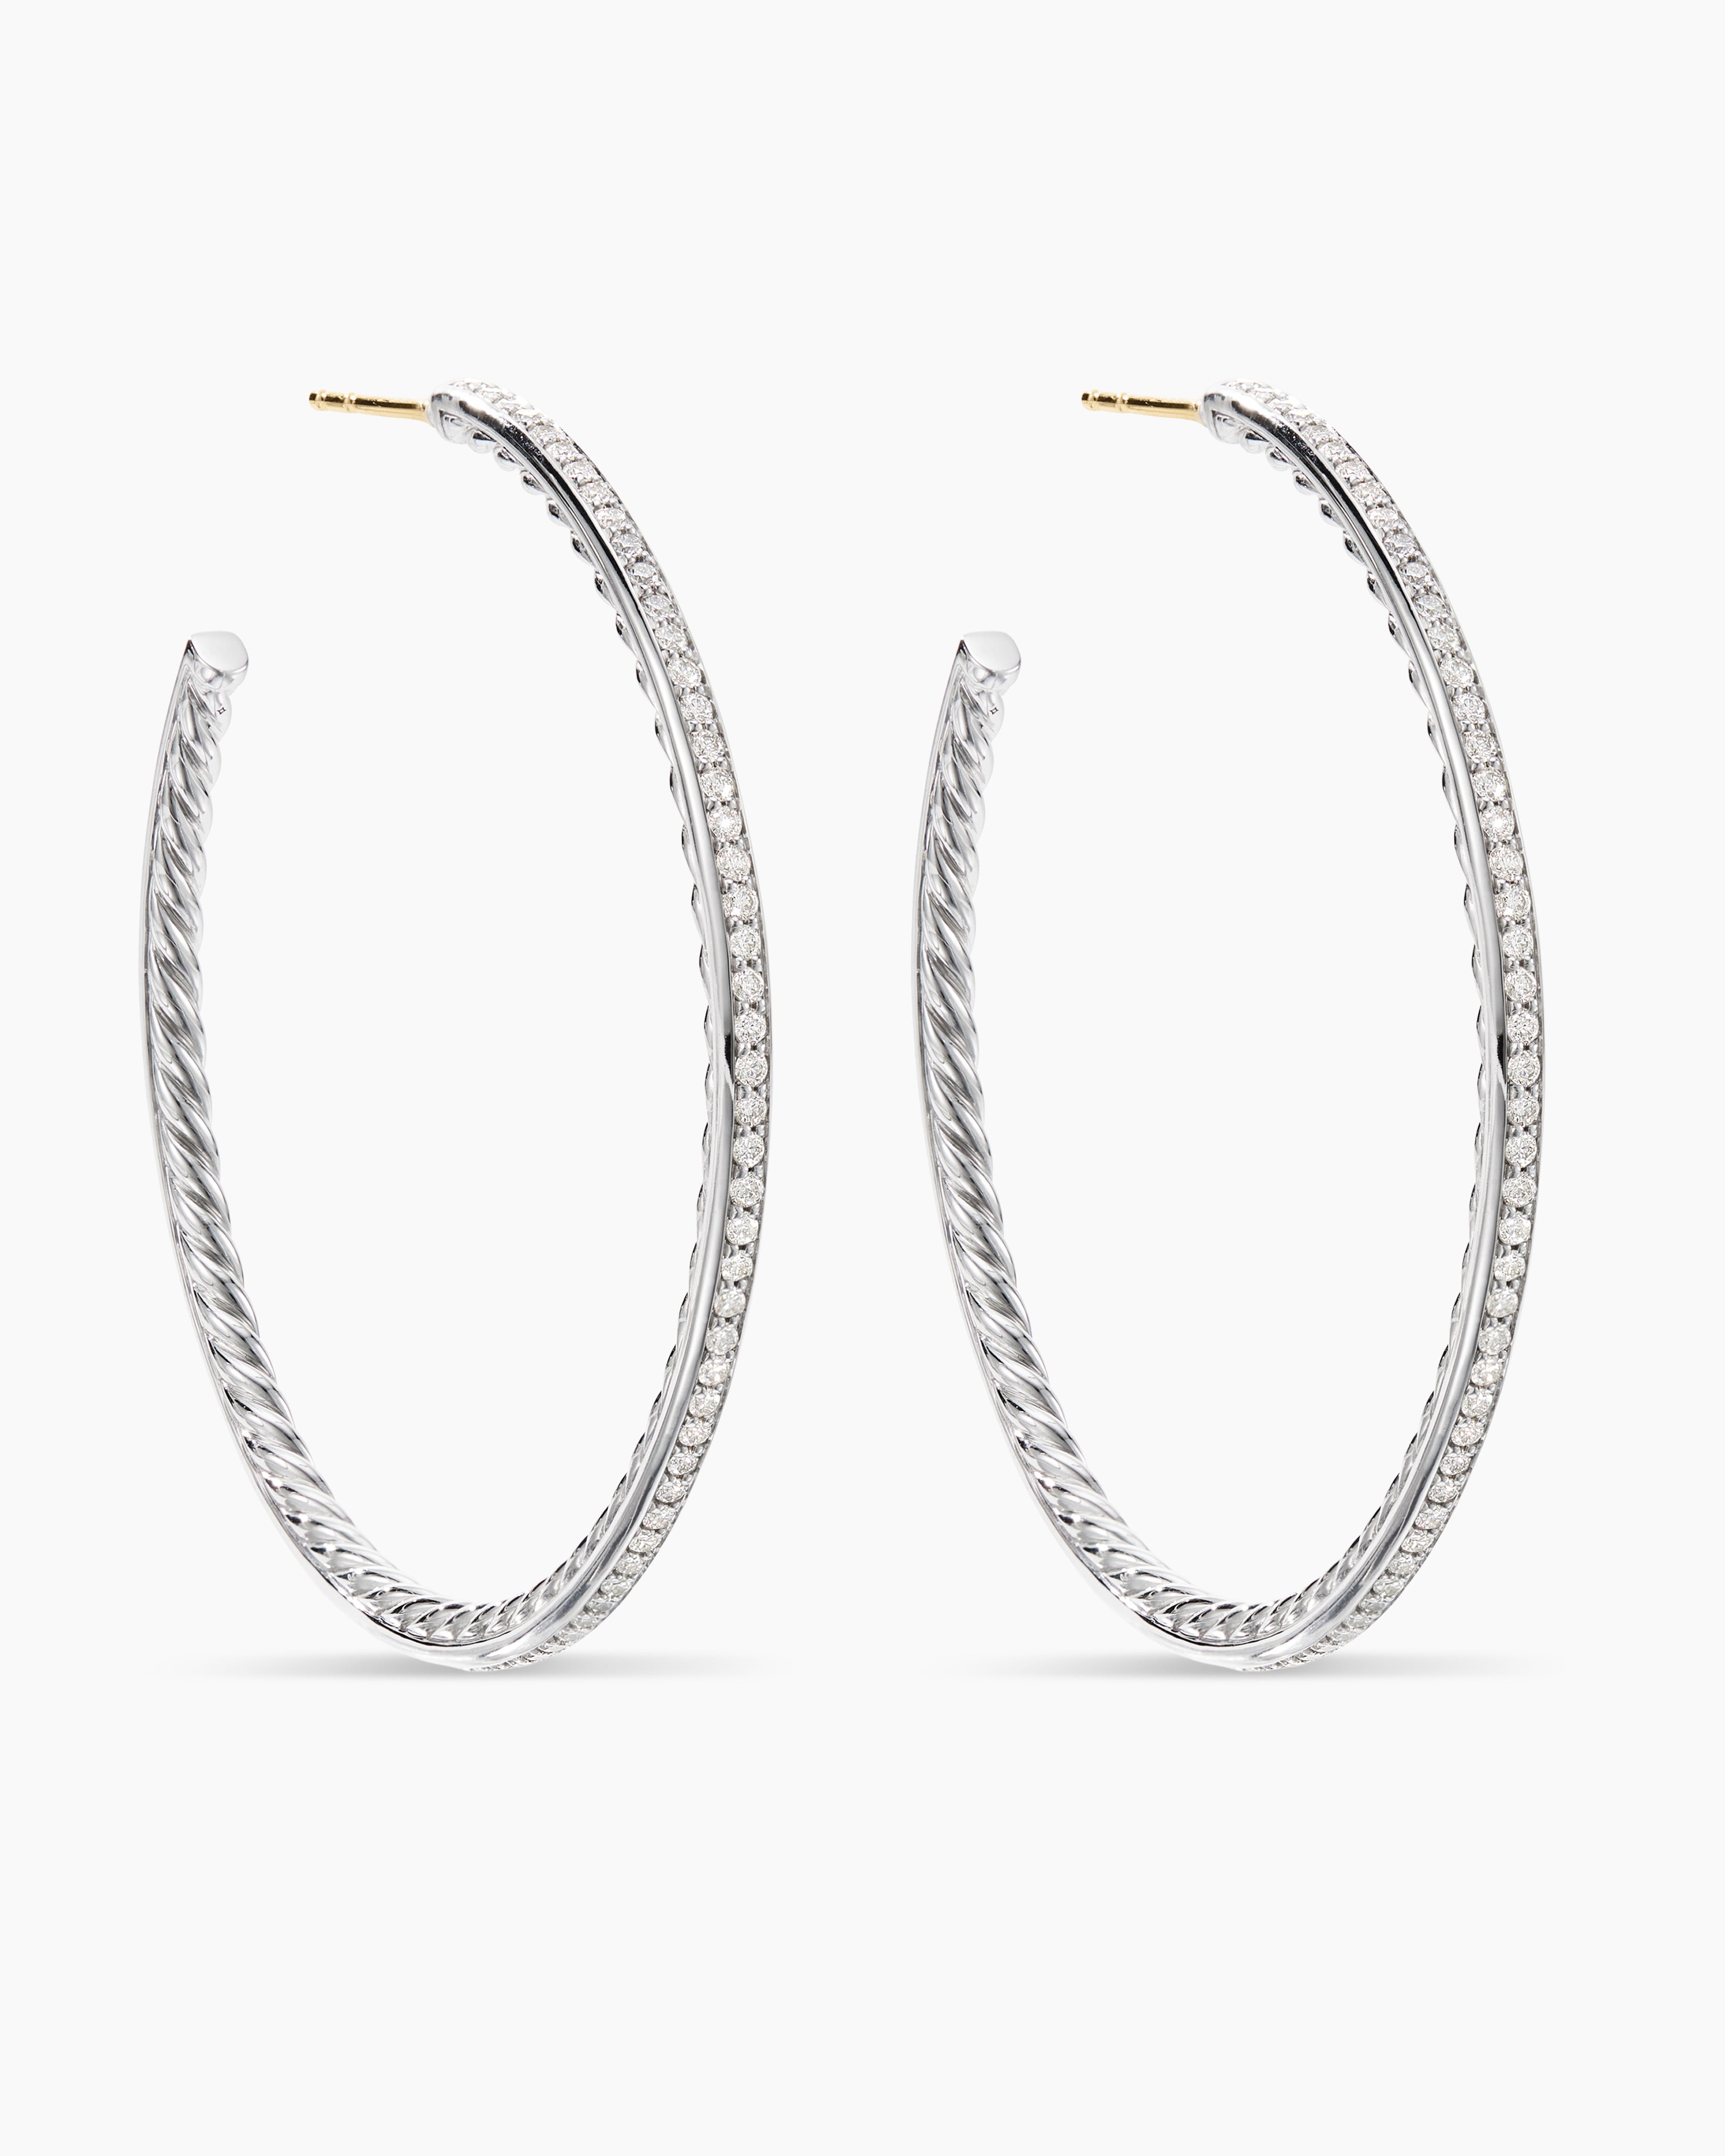 18 x 4mm small sterling silver hoop earrings for men – Sharon SaintDon  Silver and Gold Handmade Jewelry